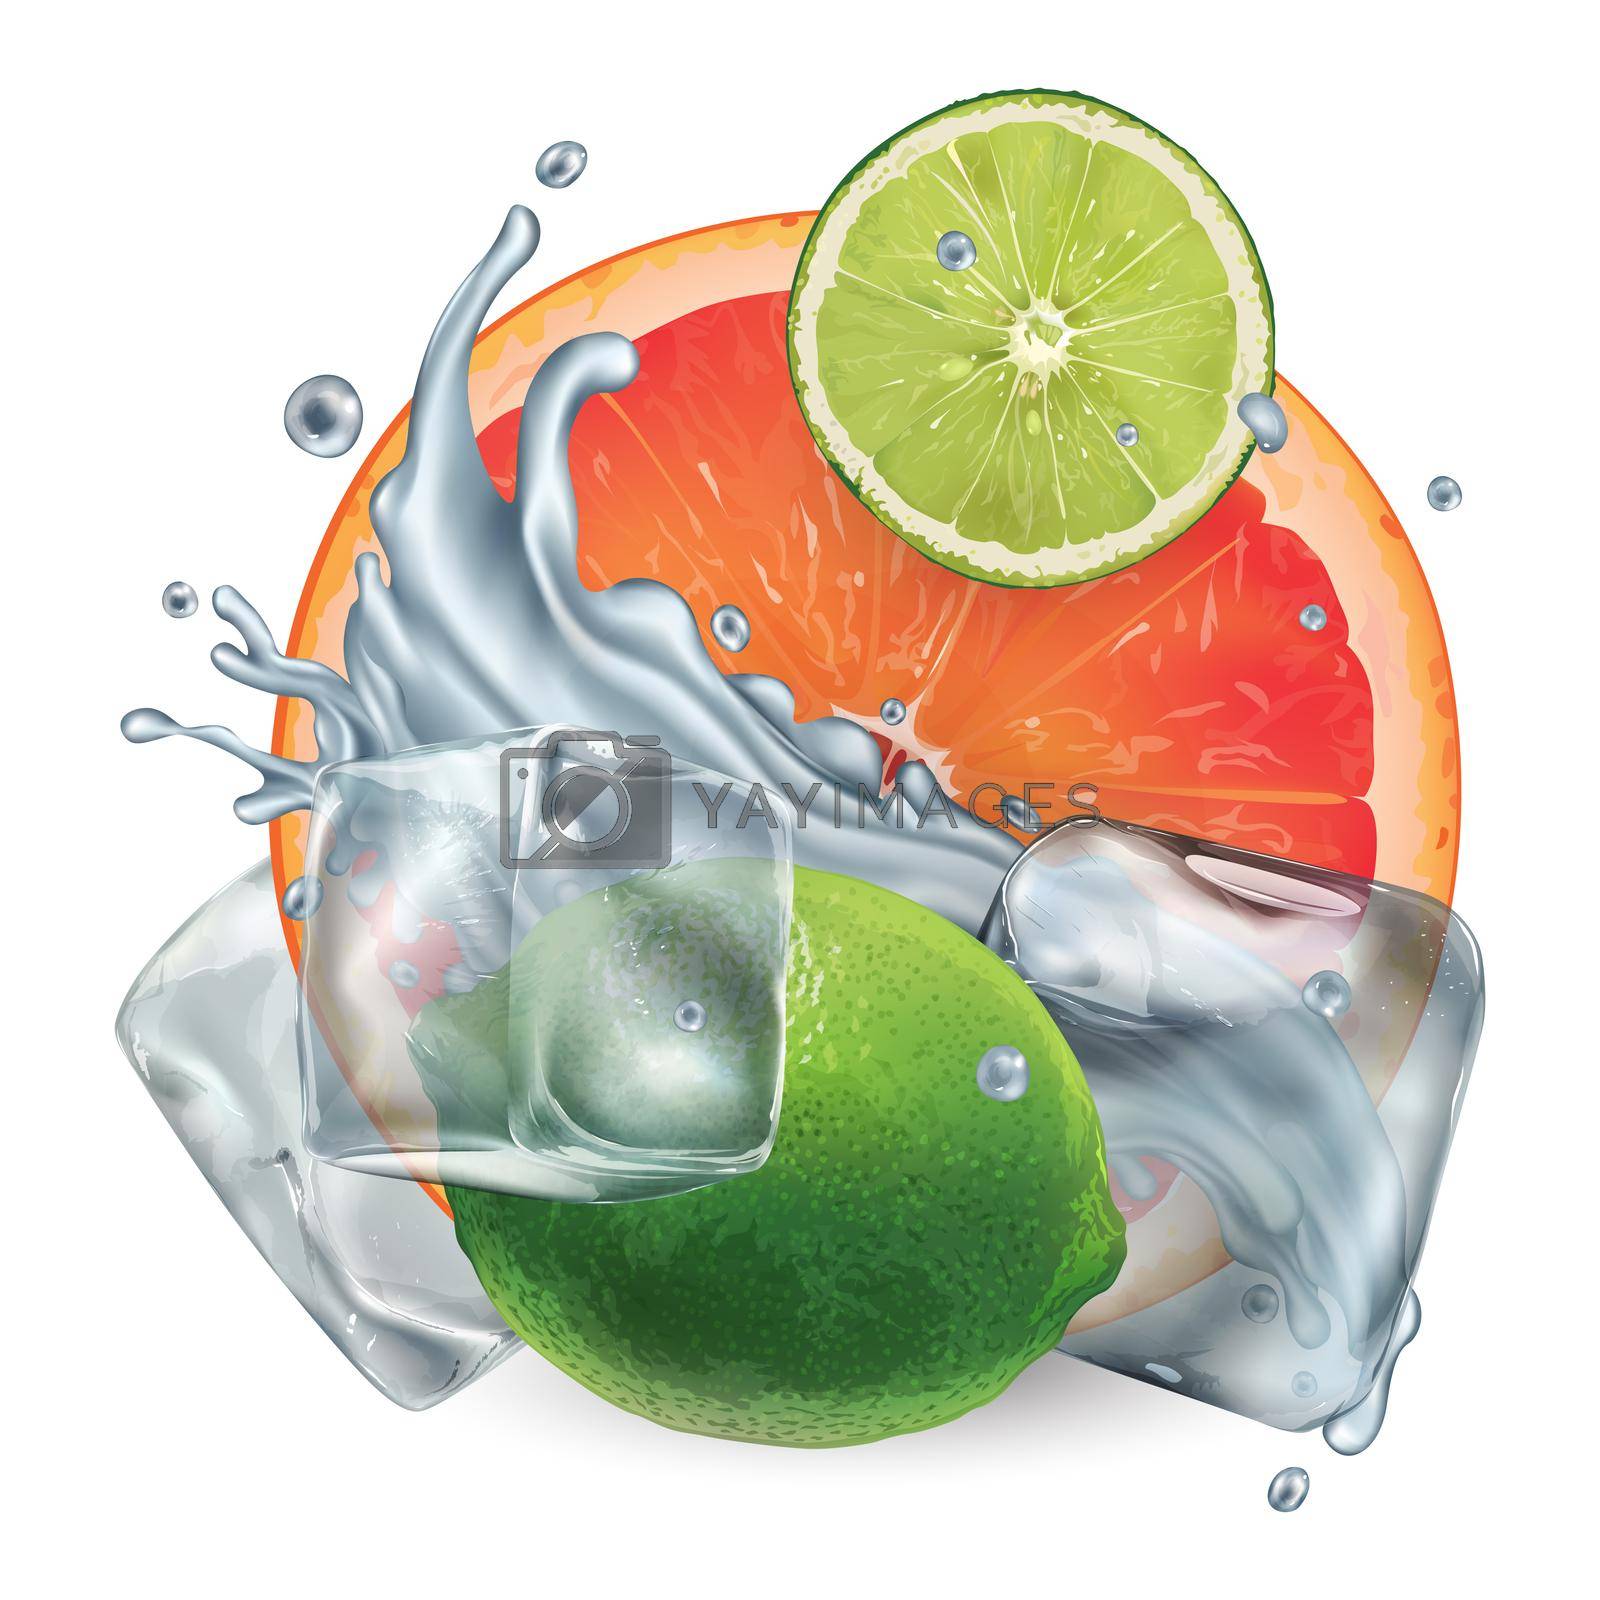 Royalty free image of Grapefruit and lime with ice cubes and water splash by ConceptCafe